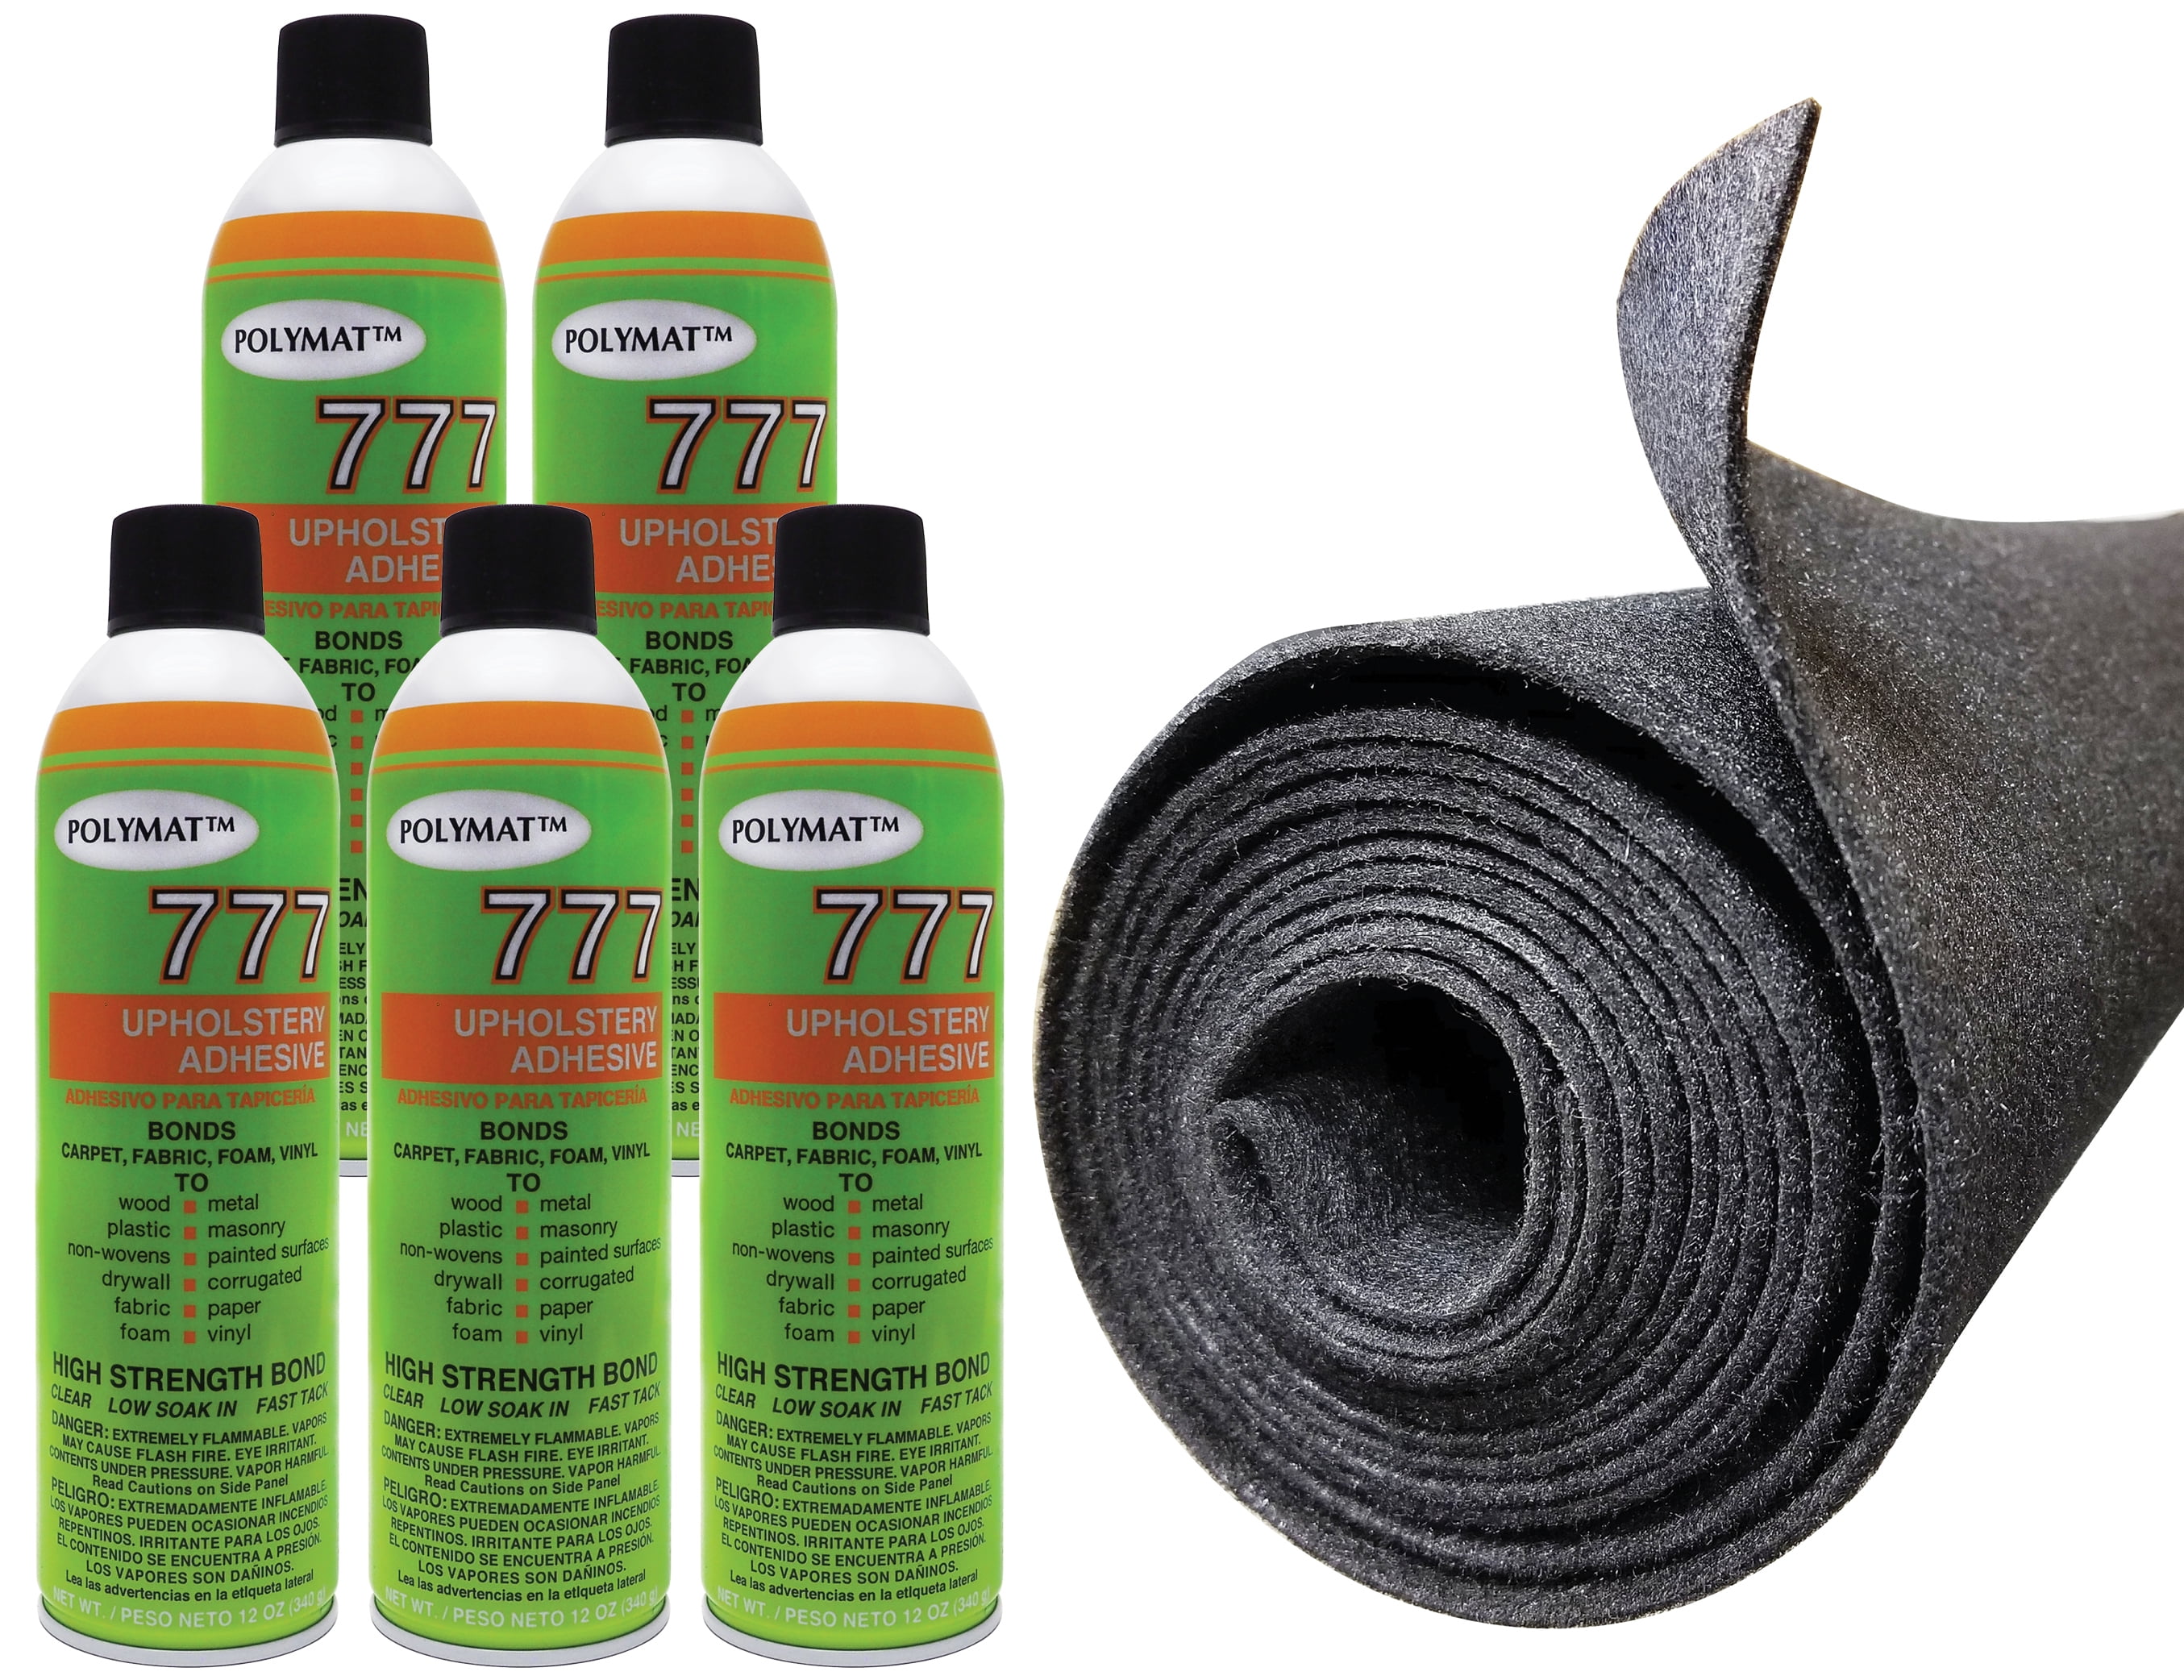 Felt Polymat Carpet Roll 16' x 3.75' Charcoal Display Accessory for Trade Show 